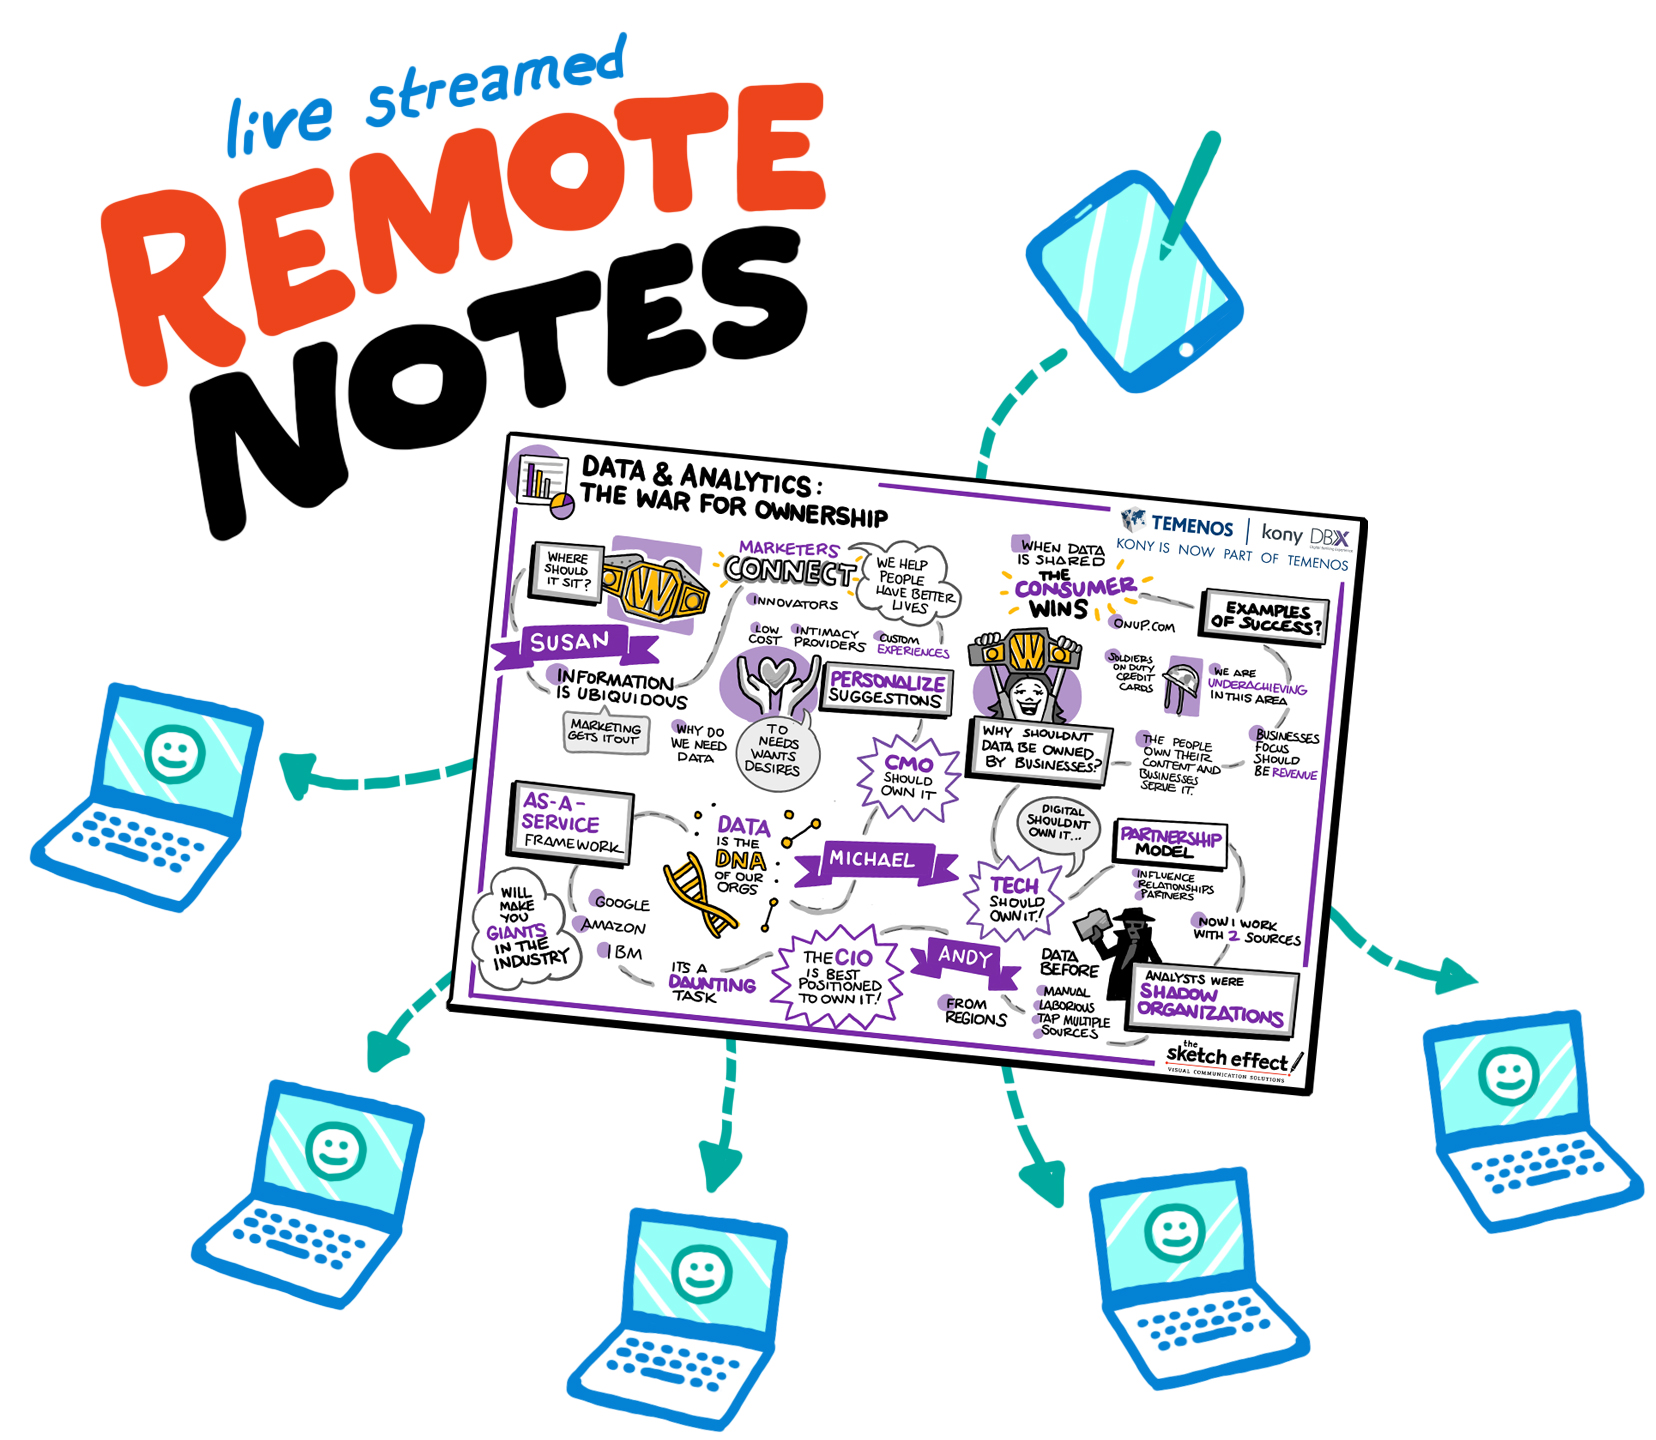 Text reading "live streamed remote notes" displayed above a graphic recording with outward facing arrows pointed to computers